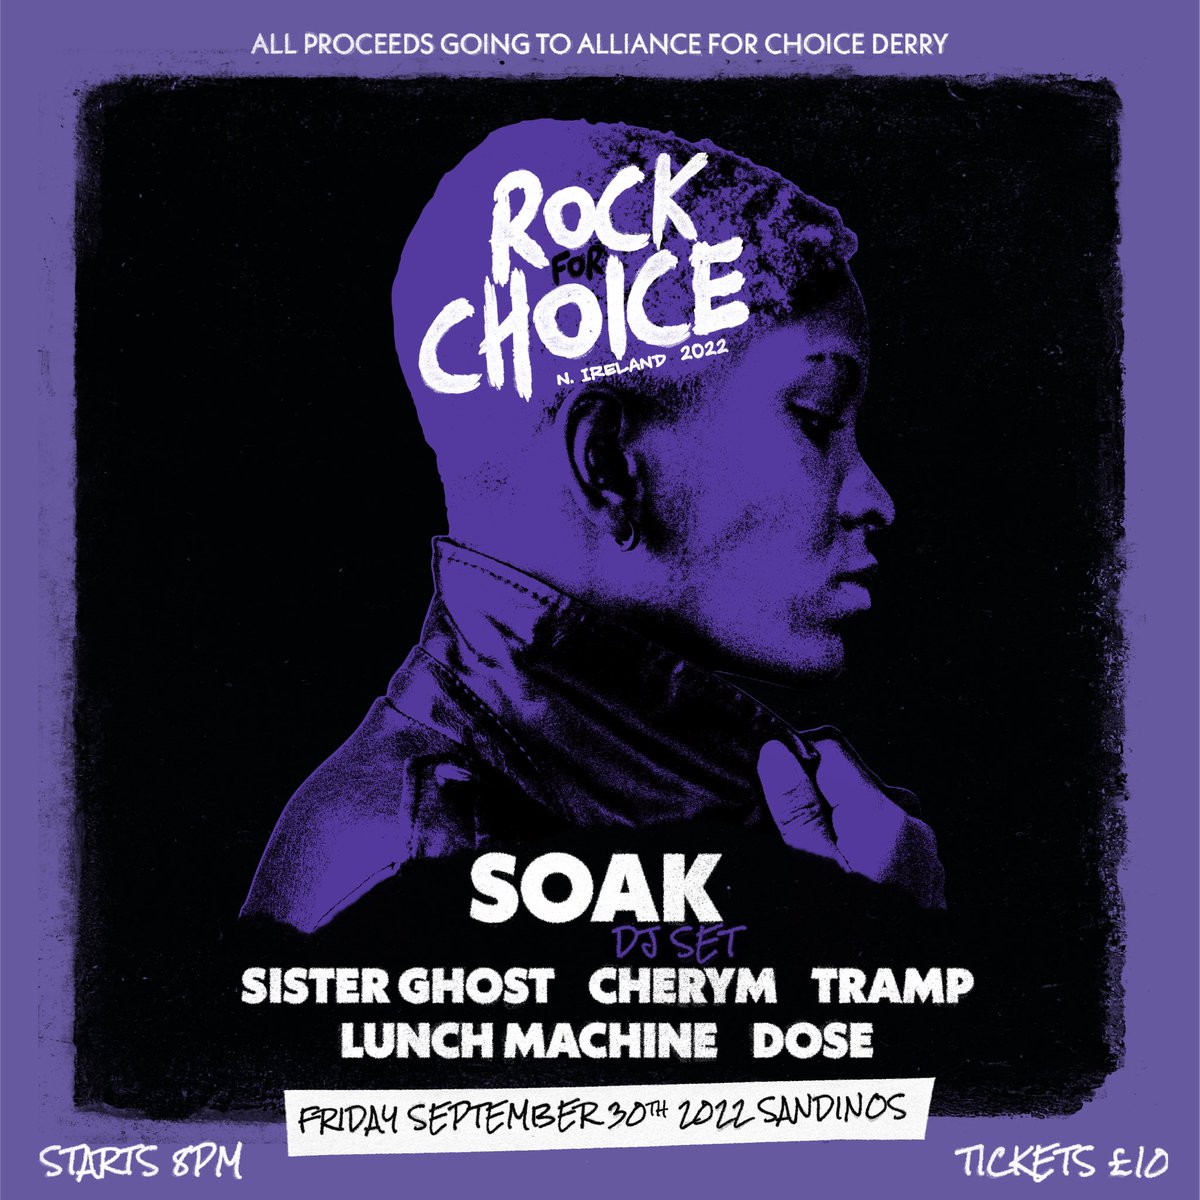 Rock For Choice NI is back! This time they are raising funds for @a4cderry with an incredible lineup! Tickets on sale soon! #rockforchoice